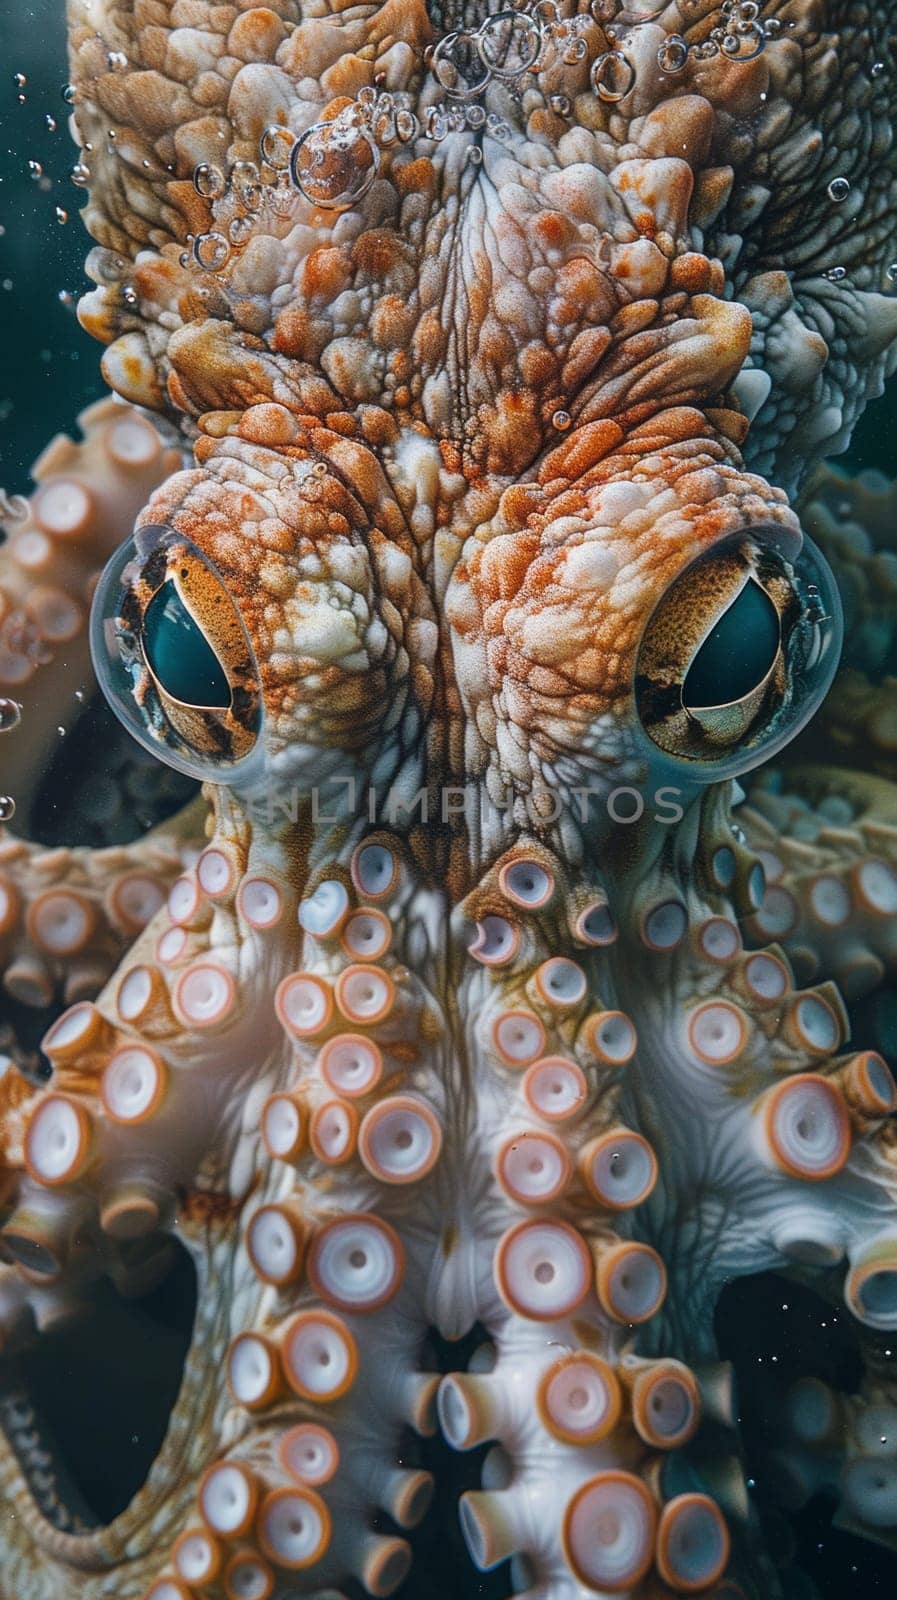 An octopus with large eyes and tentacles underwater